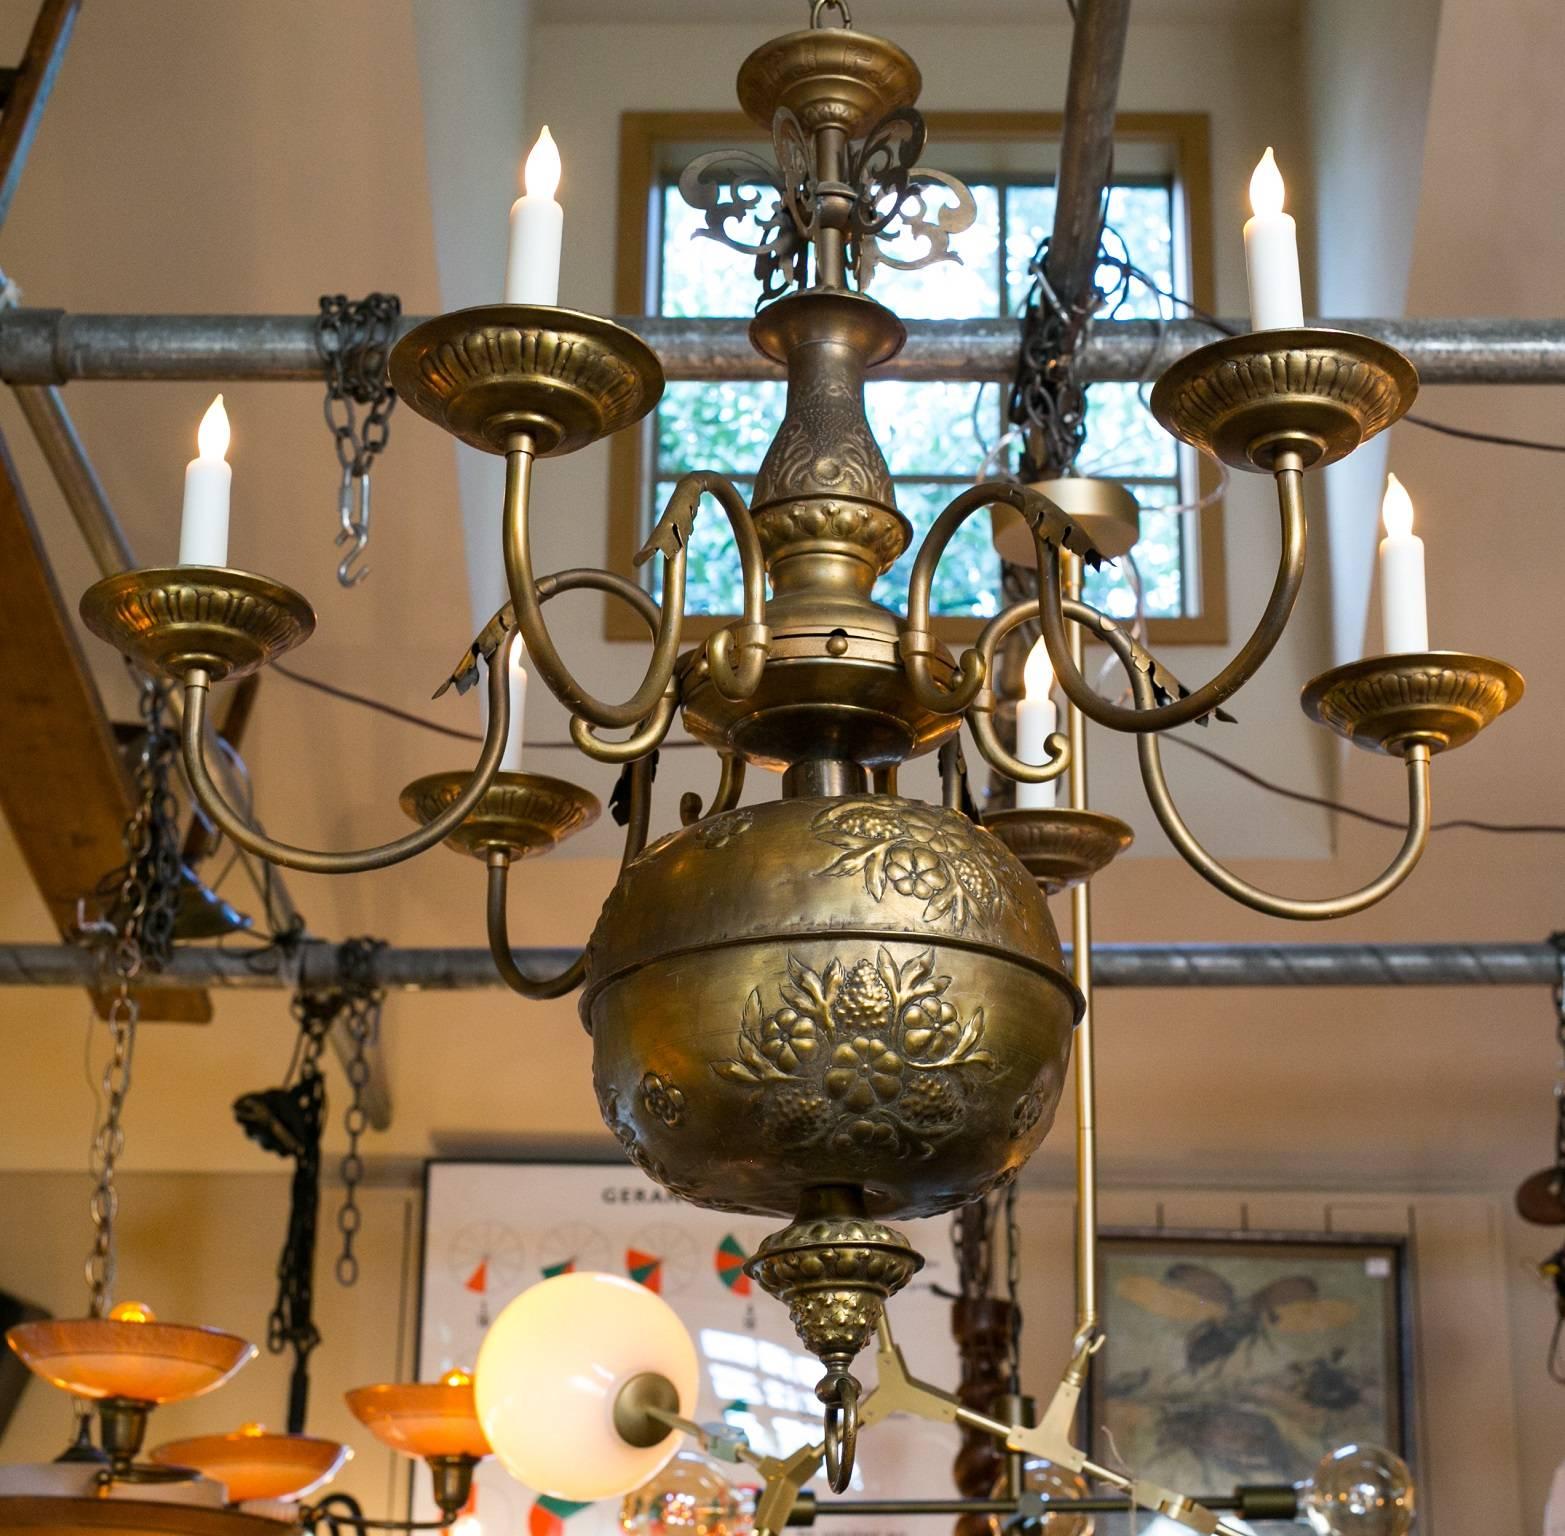 Highly unusual and rare, classic repousse' antique brass chandelier from France, circa 1900. In the Baroque style with an embossed floral motif on body with wonderful proportion. Beautiful bobeche and detailed casting. Newly wired with all UL listed